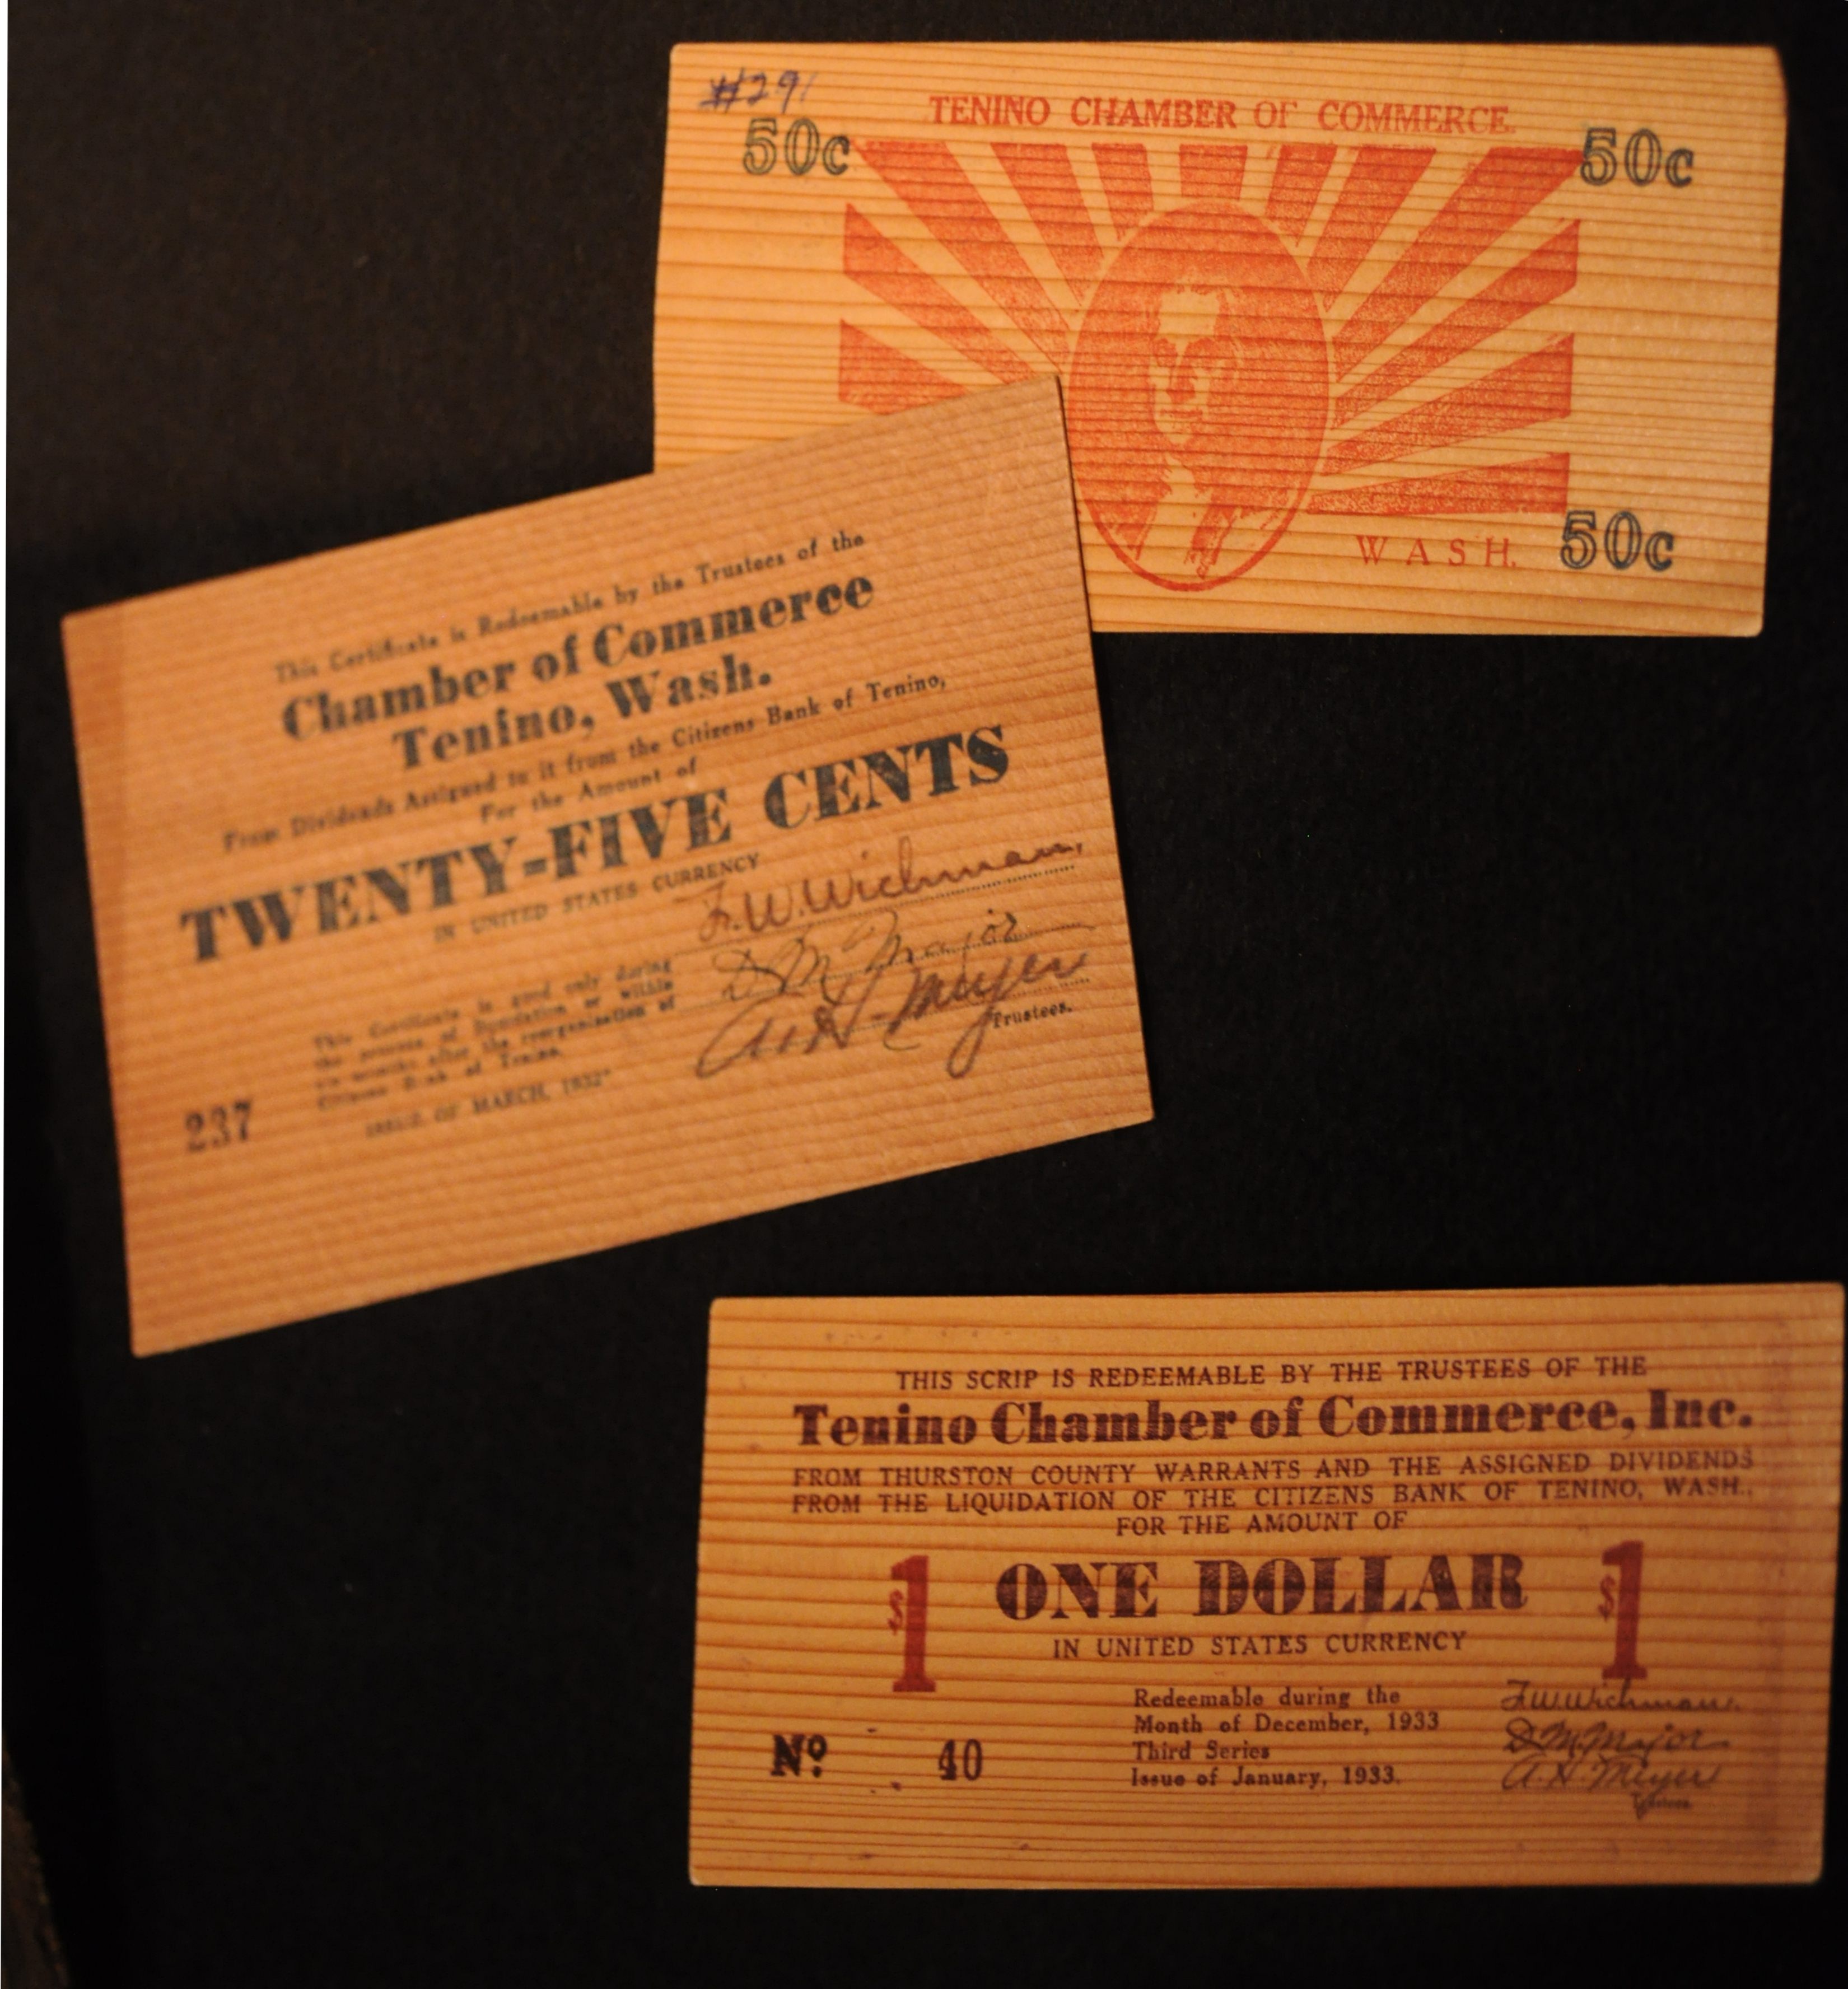 Western Community uses Wooden Money as Bank Fails,1932,Clarence Dill,Tenino 